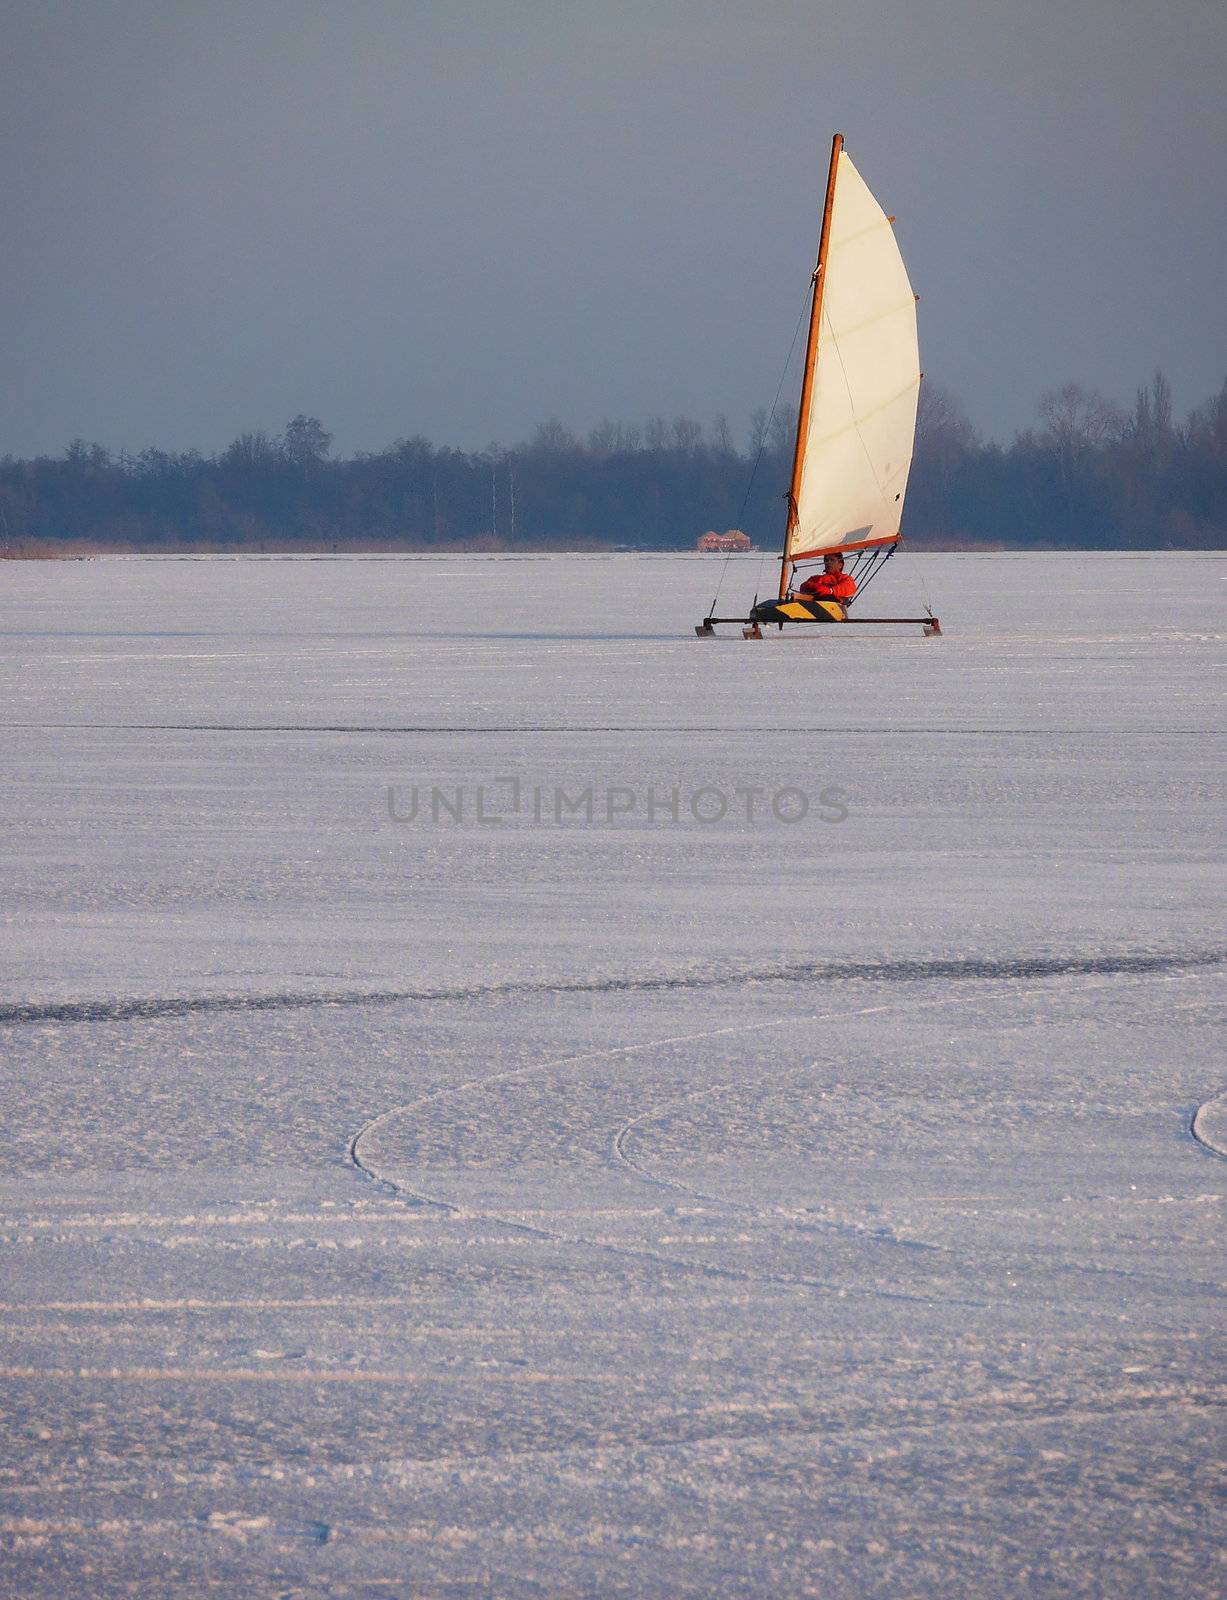 Sailing on a frozen lake in the Netherlands